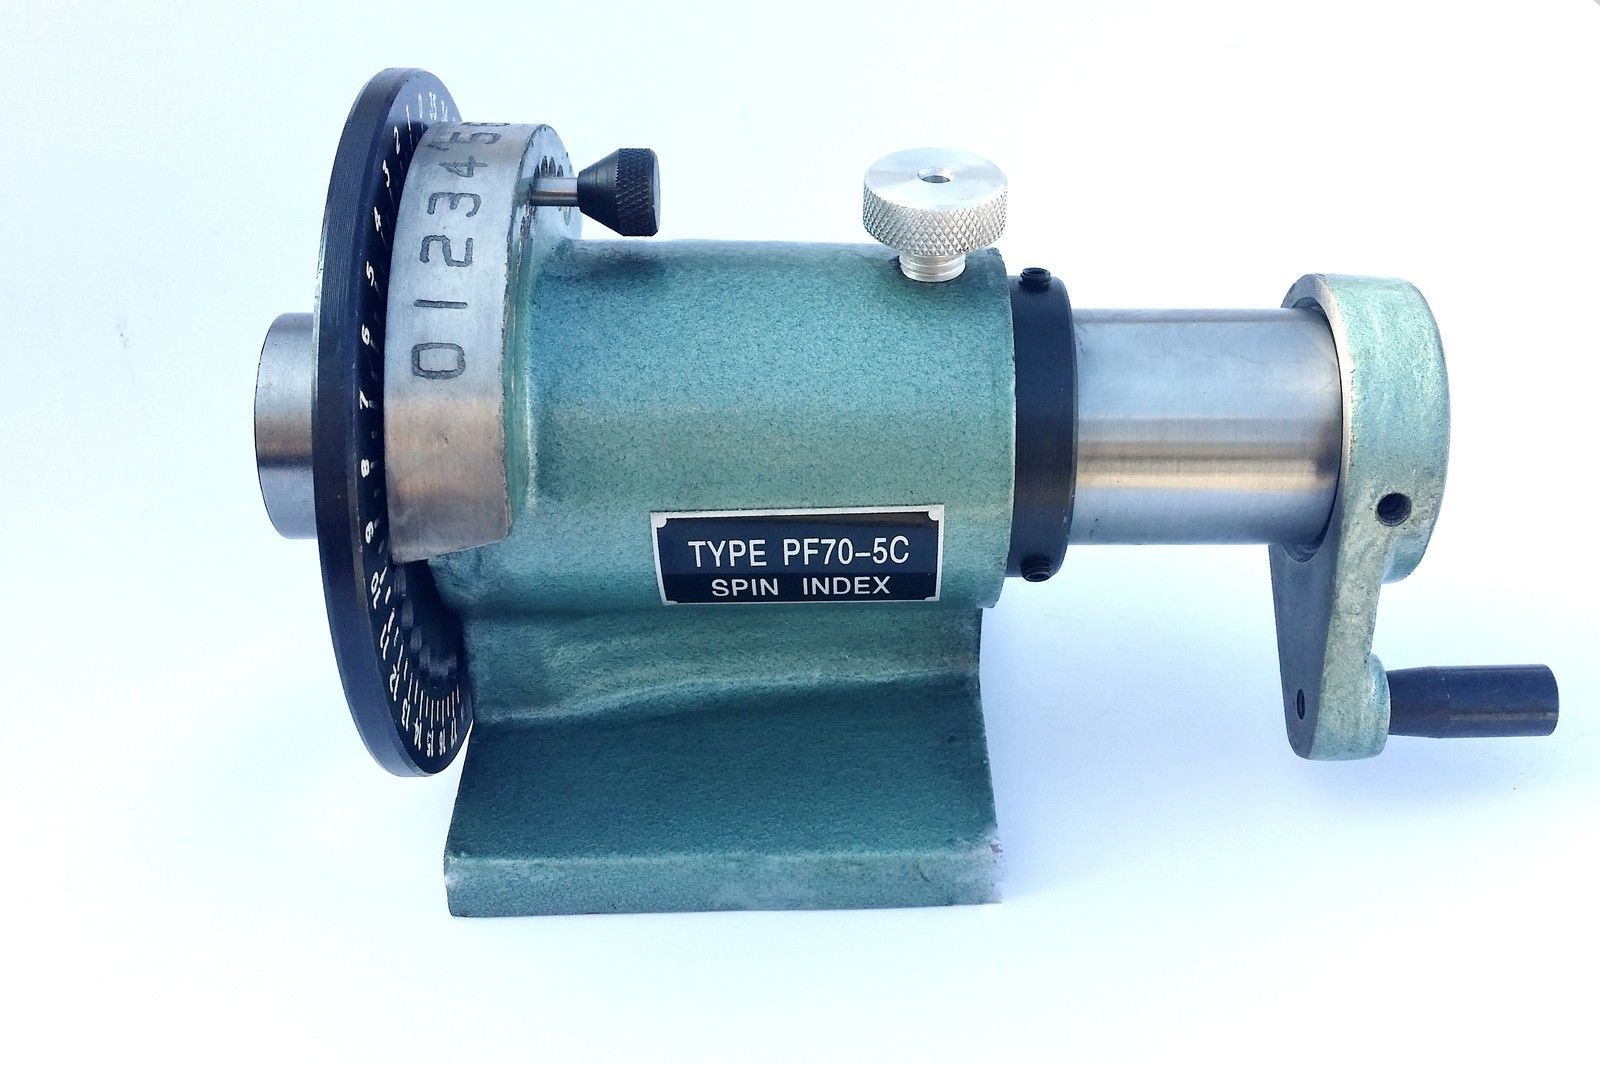 5C INDEXING SPIN JIG (3900-1604)